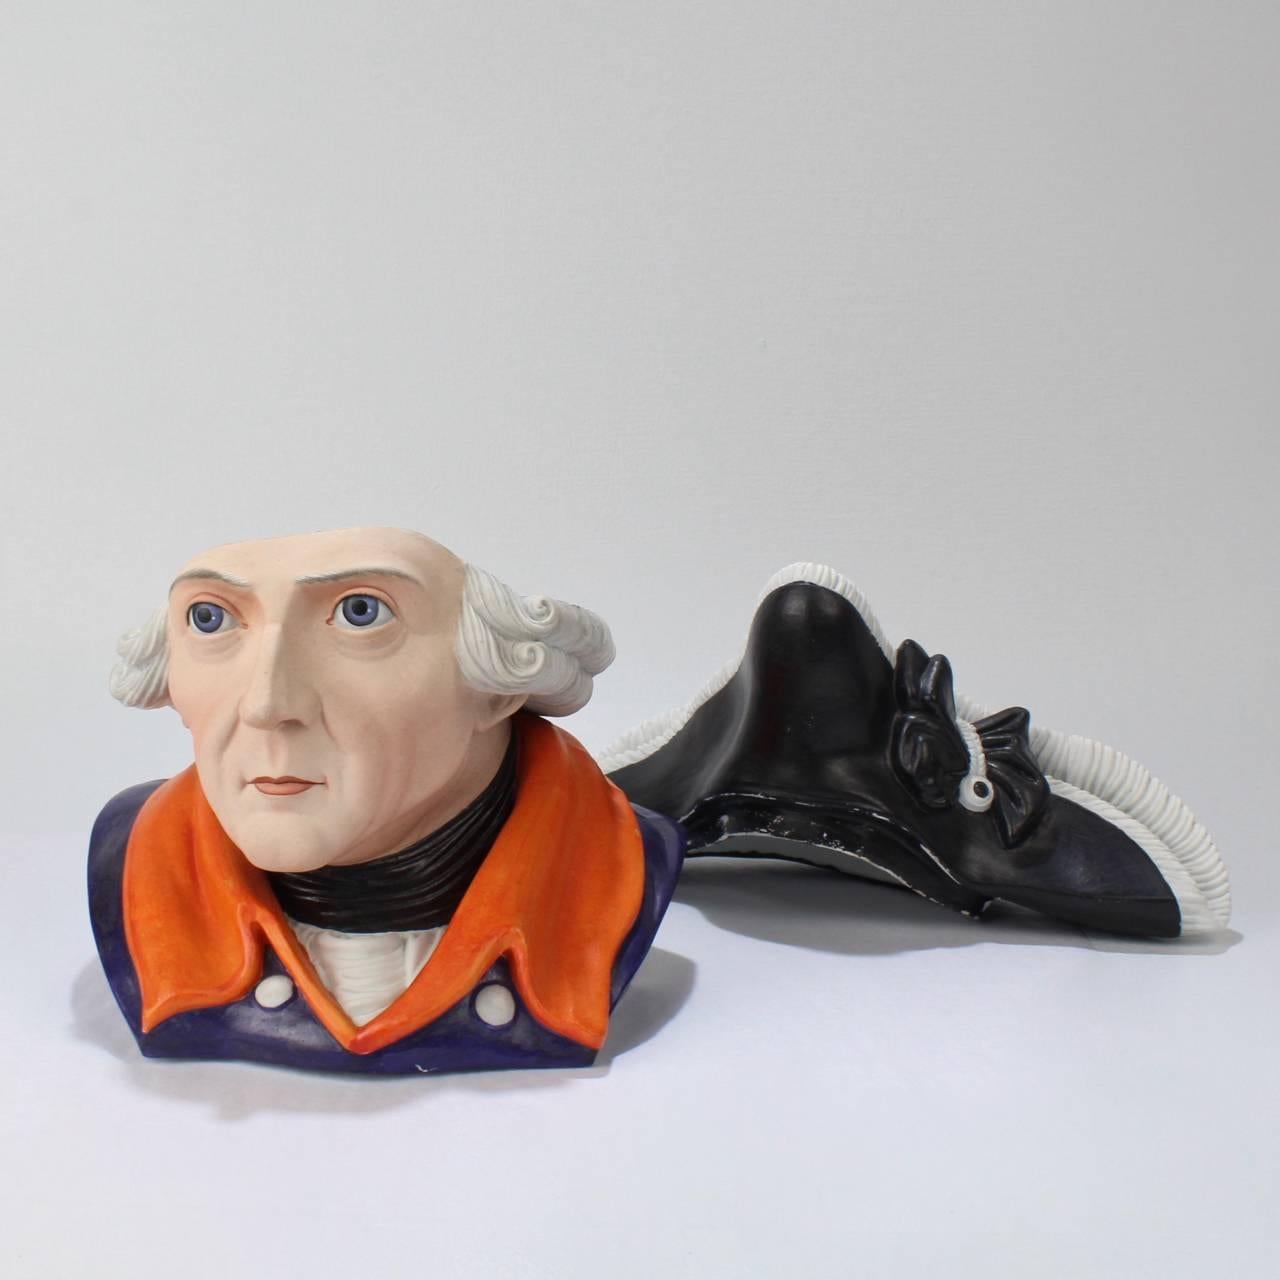 Porcelain Antique Figural German Bisque Humidor of the Prussian King Frederick the Great For Sale